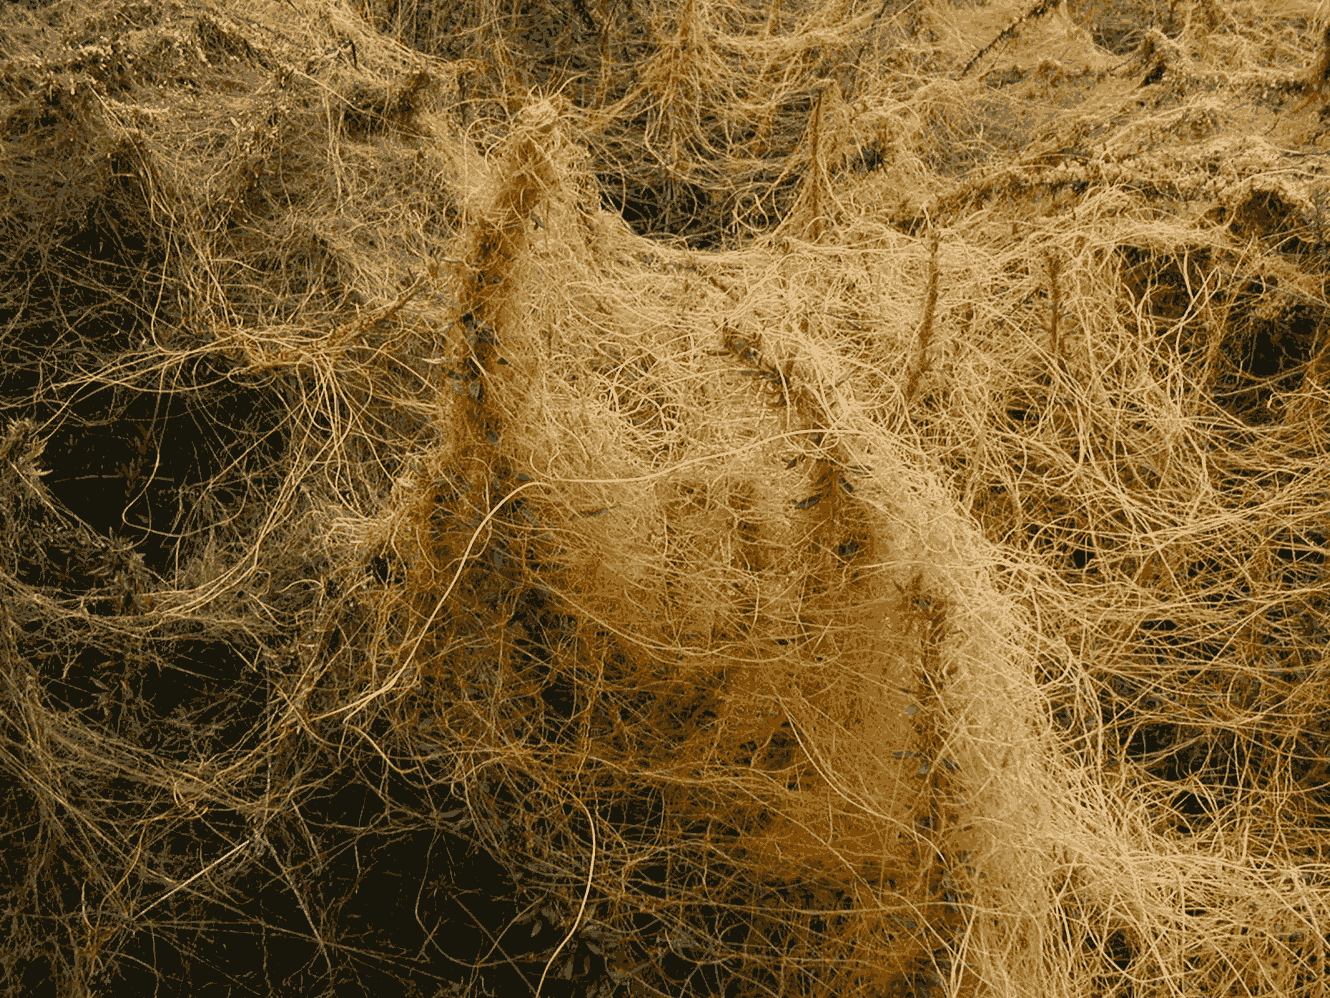 A close up of the roots of a plant